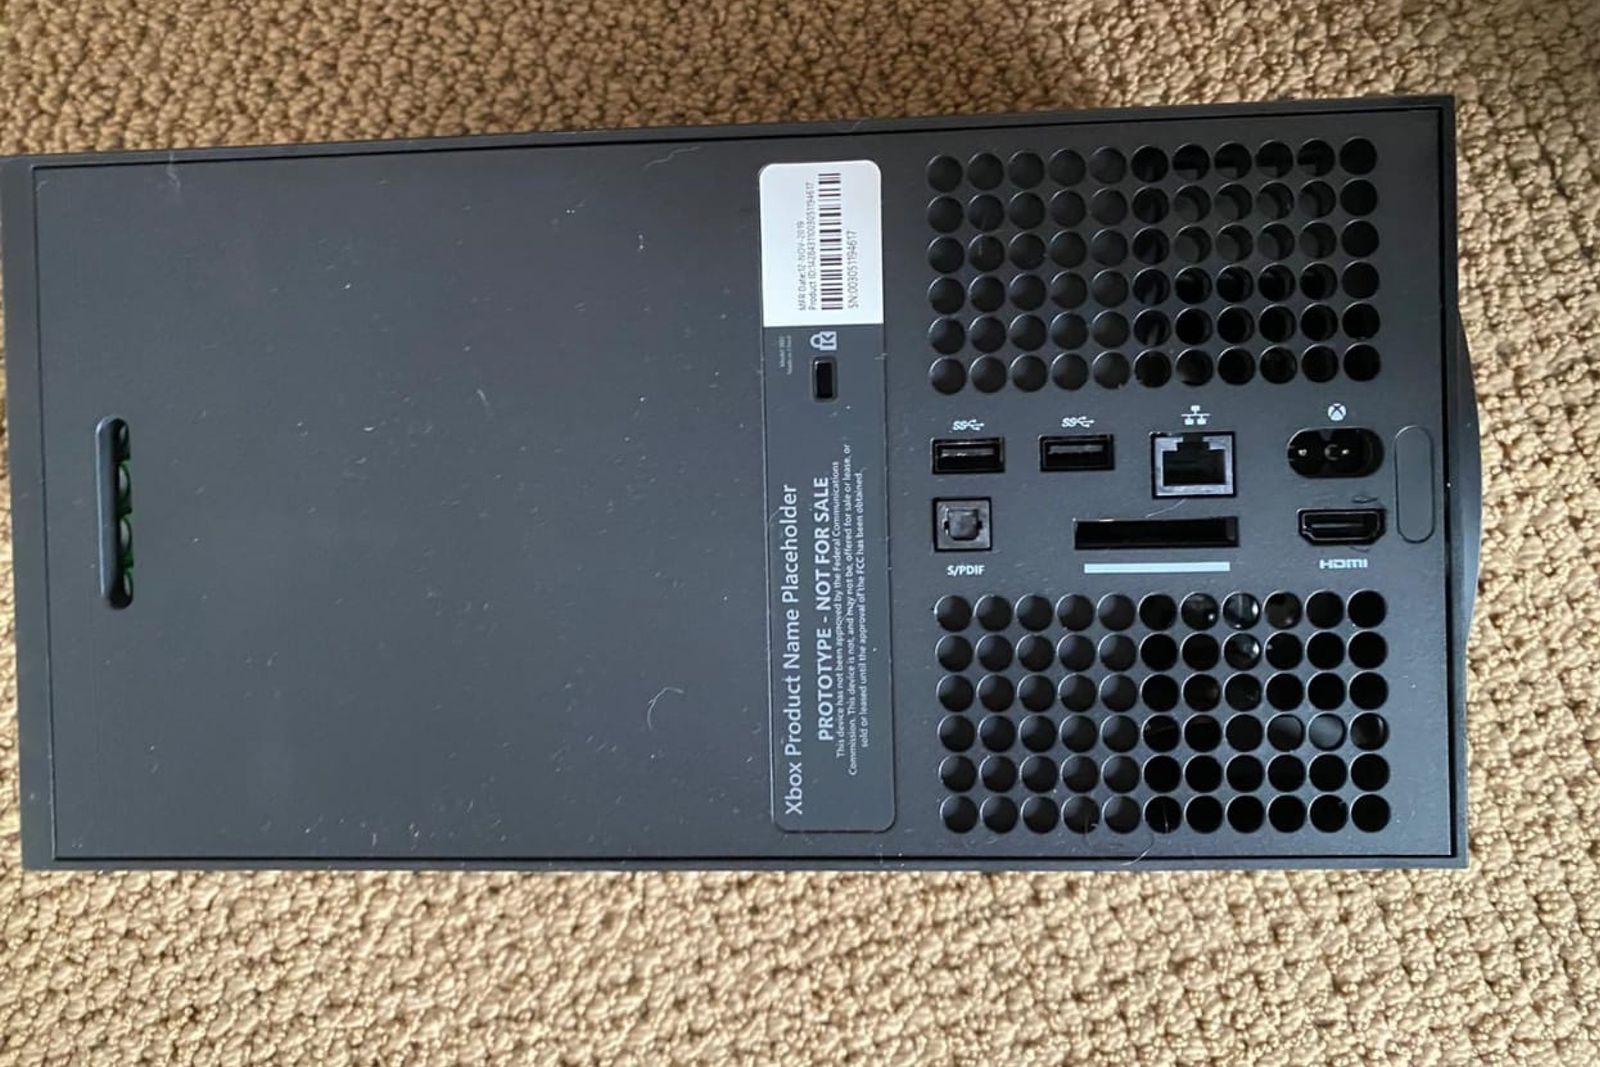 The Xbox Series Xs has its rear ports leaked on Twitter image 1